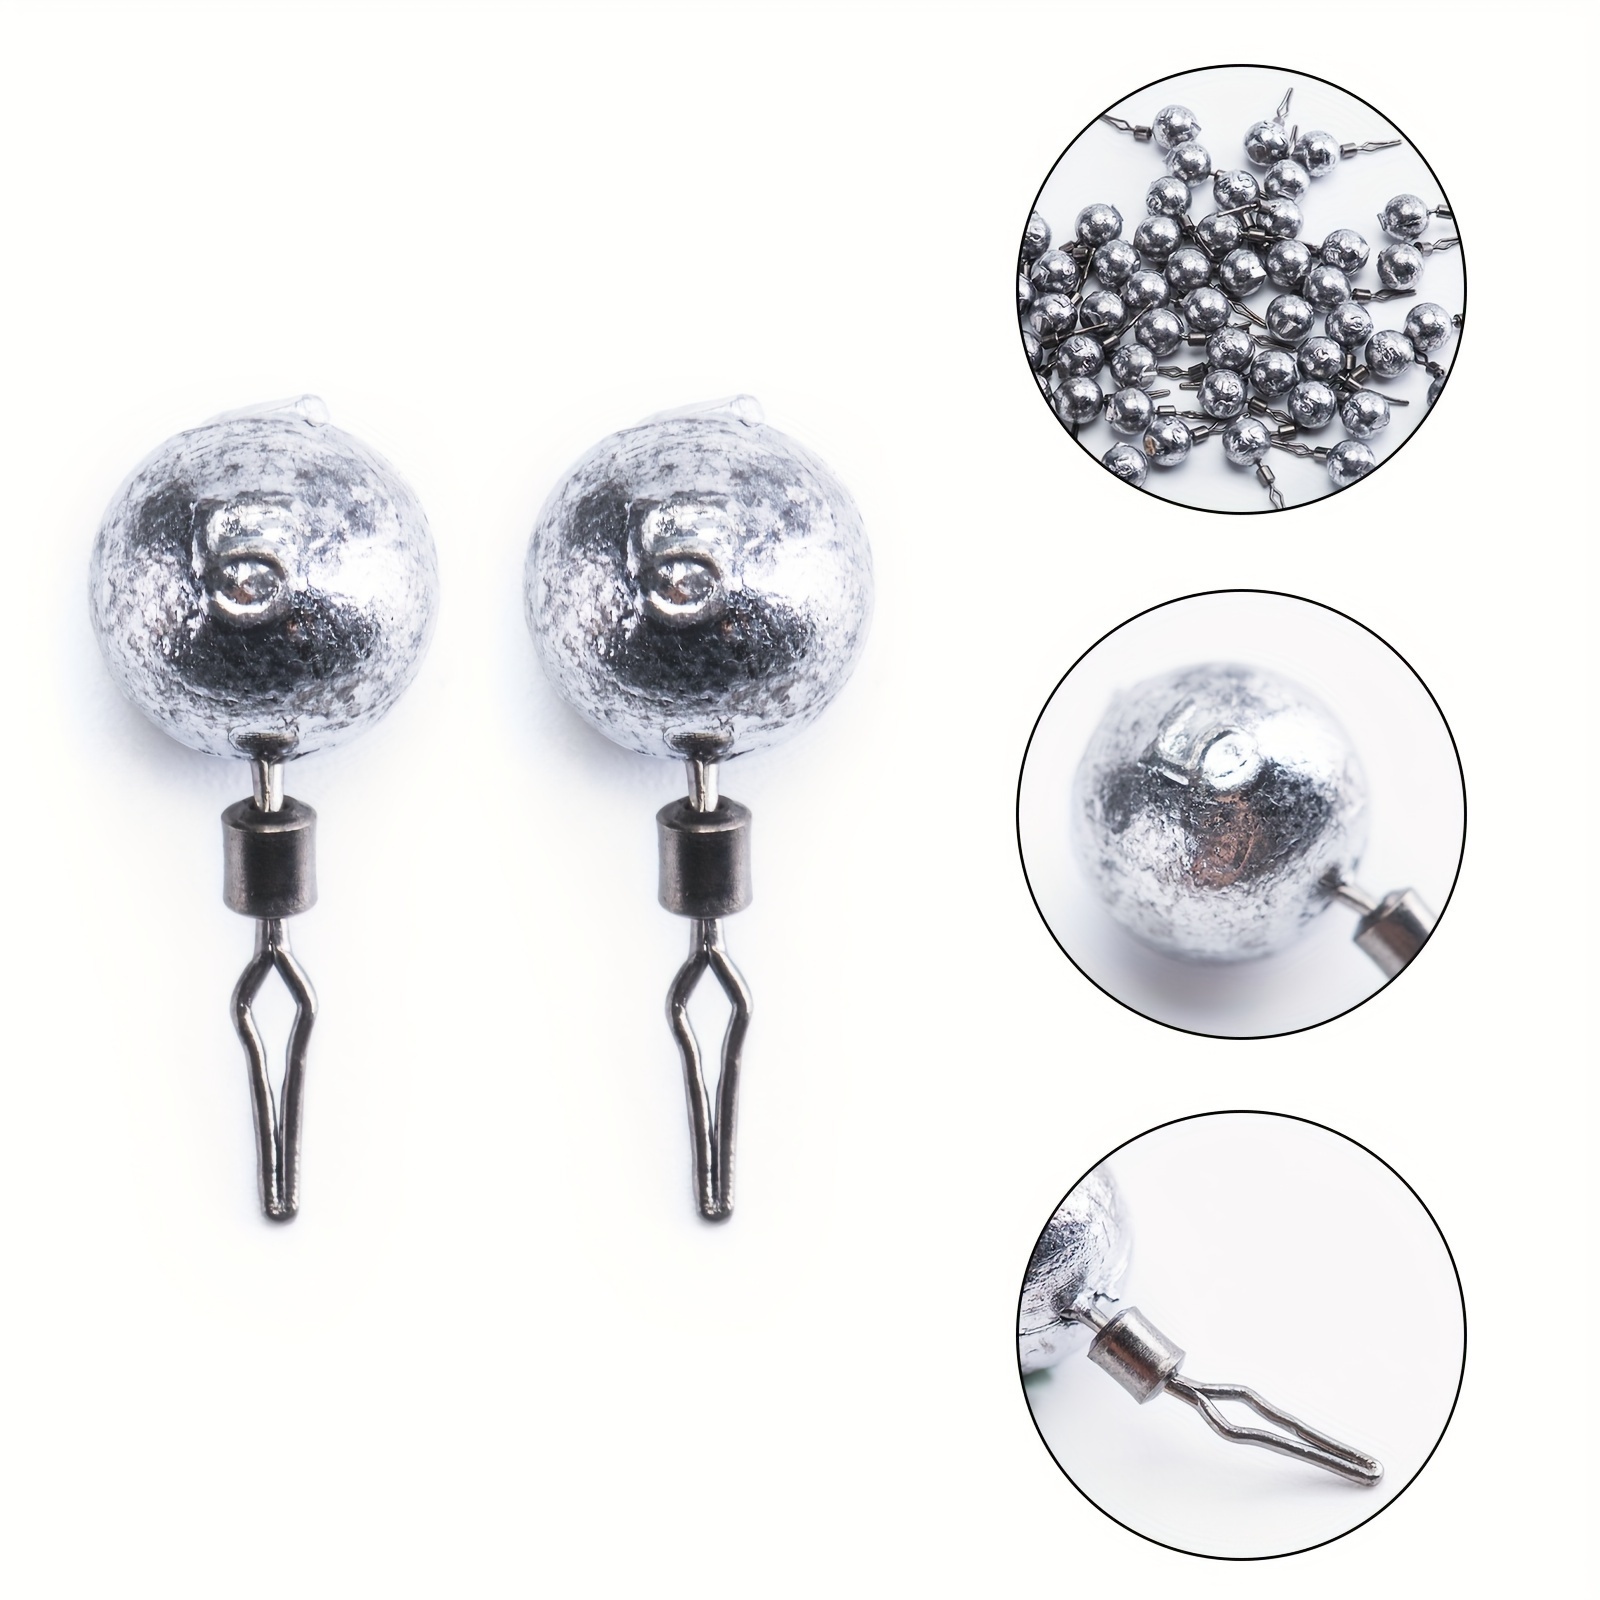 Wholesale tungsten drop shot weights to Improve Your Fishing 